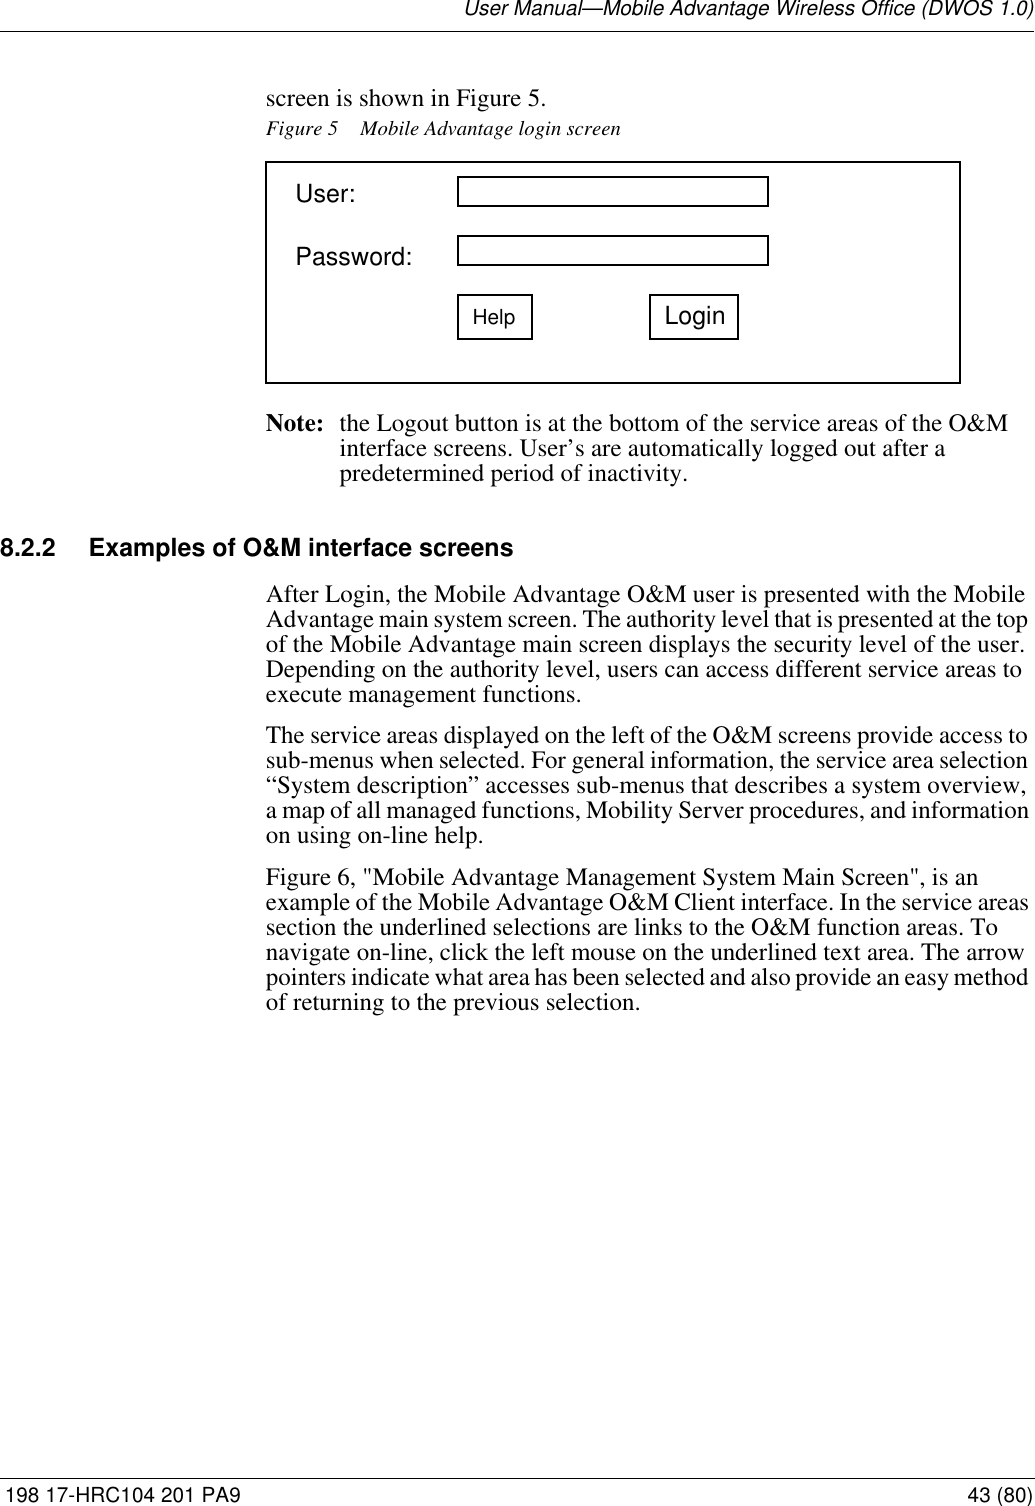 User Manual—Mobile Advantage Wireless Office (DWOS 1.0) 198 17-HRC104 201 PA9 43 (80)screen is shown in Figure 5. Figure 5 Mobile Advantage login screenNote: the Logout button is at the bottom of the service areas of the O&amp;M interface screens. User’s are automatically logged out after a predetermined period of inactivity.8.2.2 Examples of O&amp;M interface screensAfter Login, the Mobile Advantage O&amp;M user is presented with the Mobile Advantage main system screen. The authority level that is presented at the top of the Mobile Advantage main screen displays the security level of the user. Depending on the authority level, users can access different service areas to execute management functions. The service areas displayed on the left of the O&amp;M screens provide access to sub-menus when selected. For general information, the service area selection “System description” accesses sub-menus that describes a system overview, a map of all managed functions, Mobility Server procedures, and information on using on-line help.Figure 6, &quot;Mobile Advantage Management System Main Screen&quot;, is an example of the Mobile Advantage O&amp;M Client interface. In the service areas section the underlined selections are links to the O&amp;M function areas. To navigate on-line, click the left mouse on the underlined text area. The arrow pointers indicate what area has been selected and also provide an easy method of returning to the previous selection.Password: HelpUser: Login